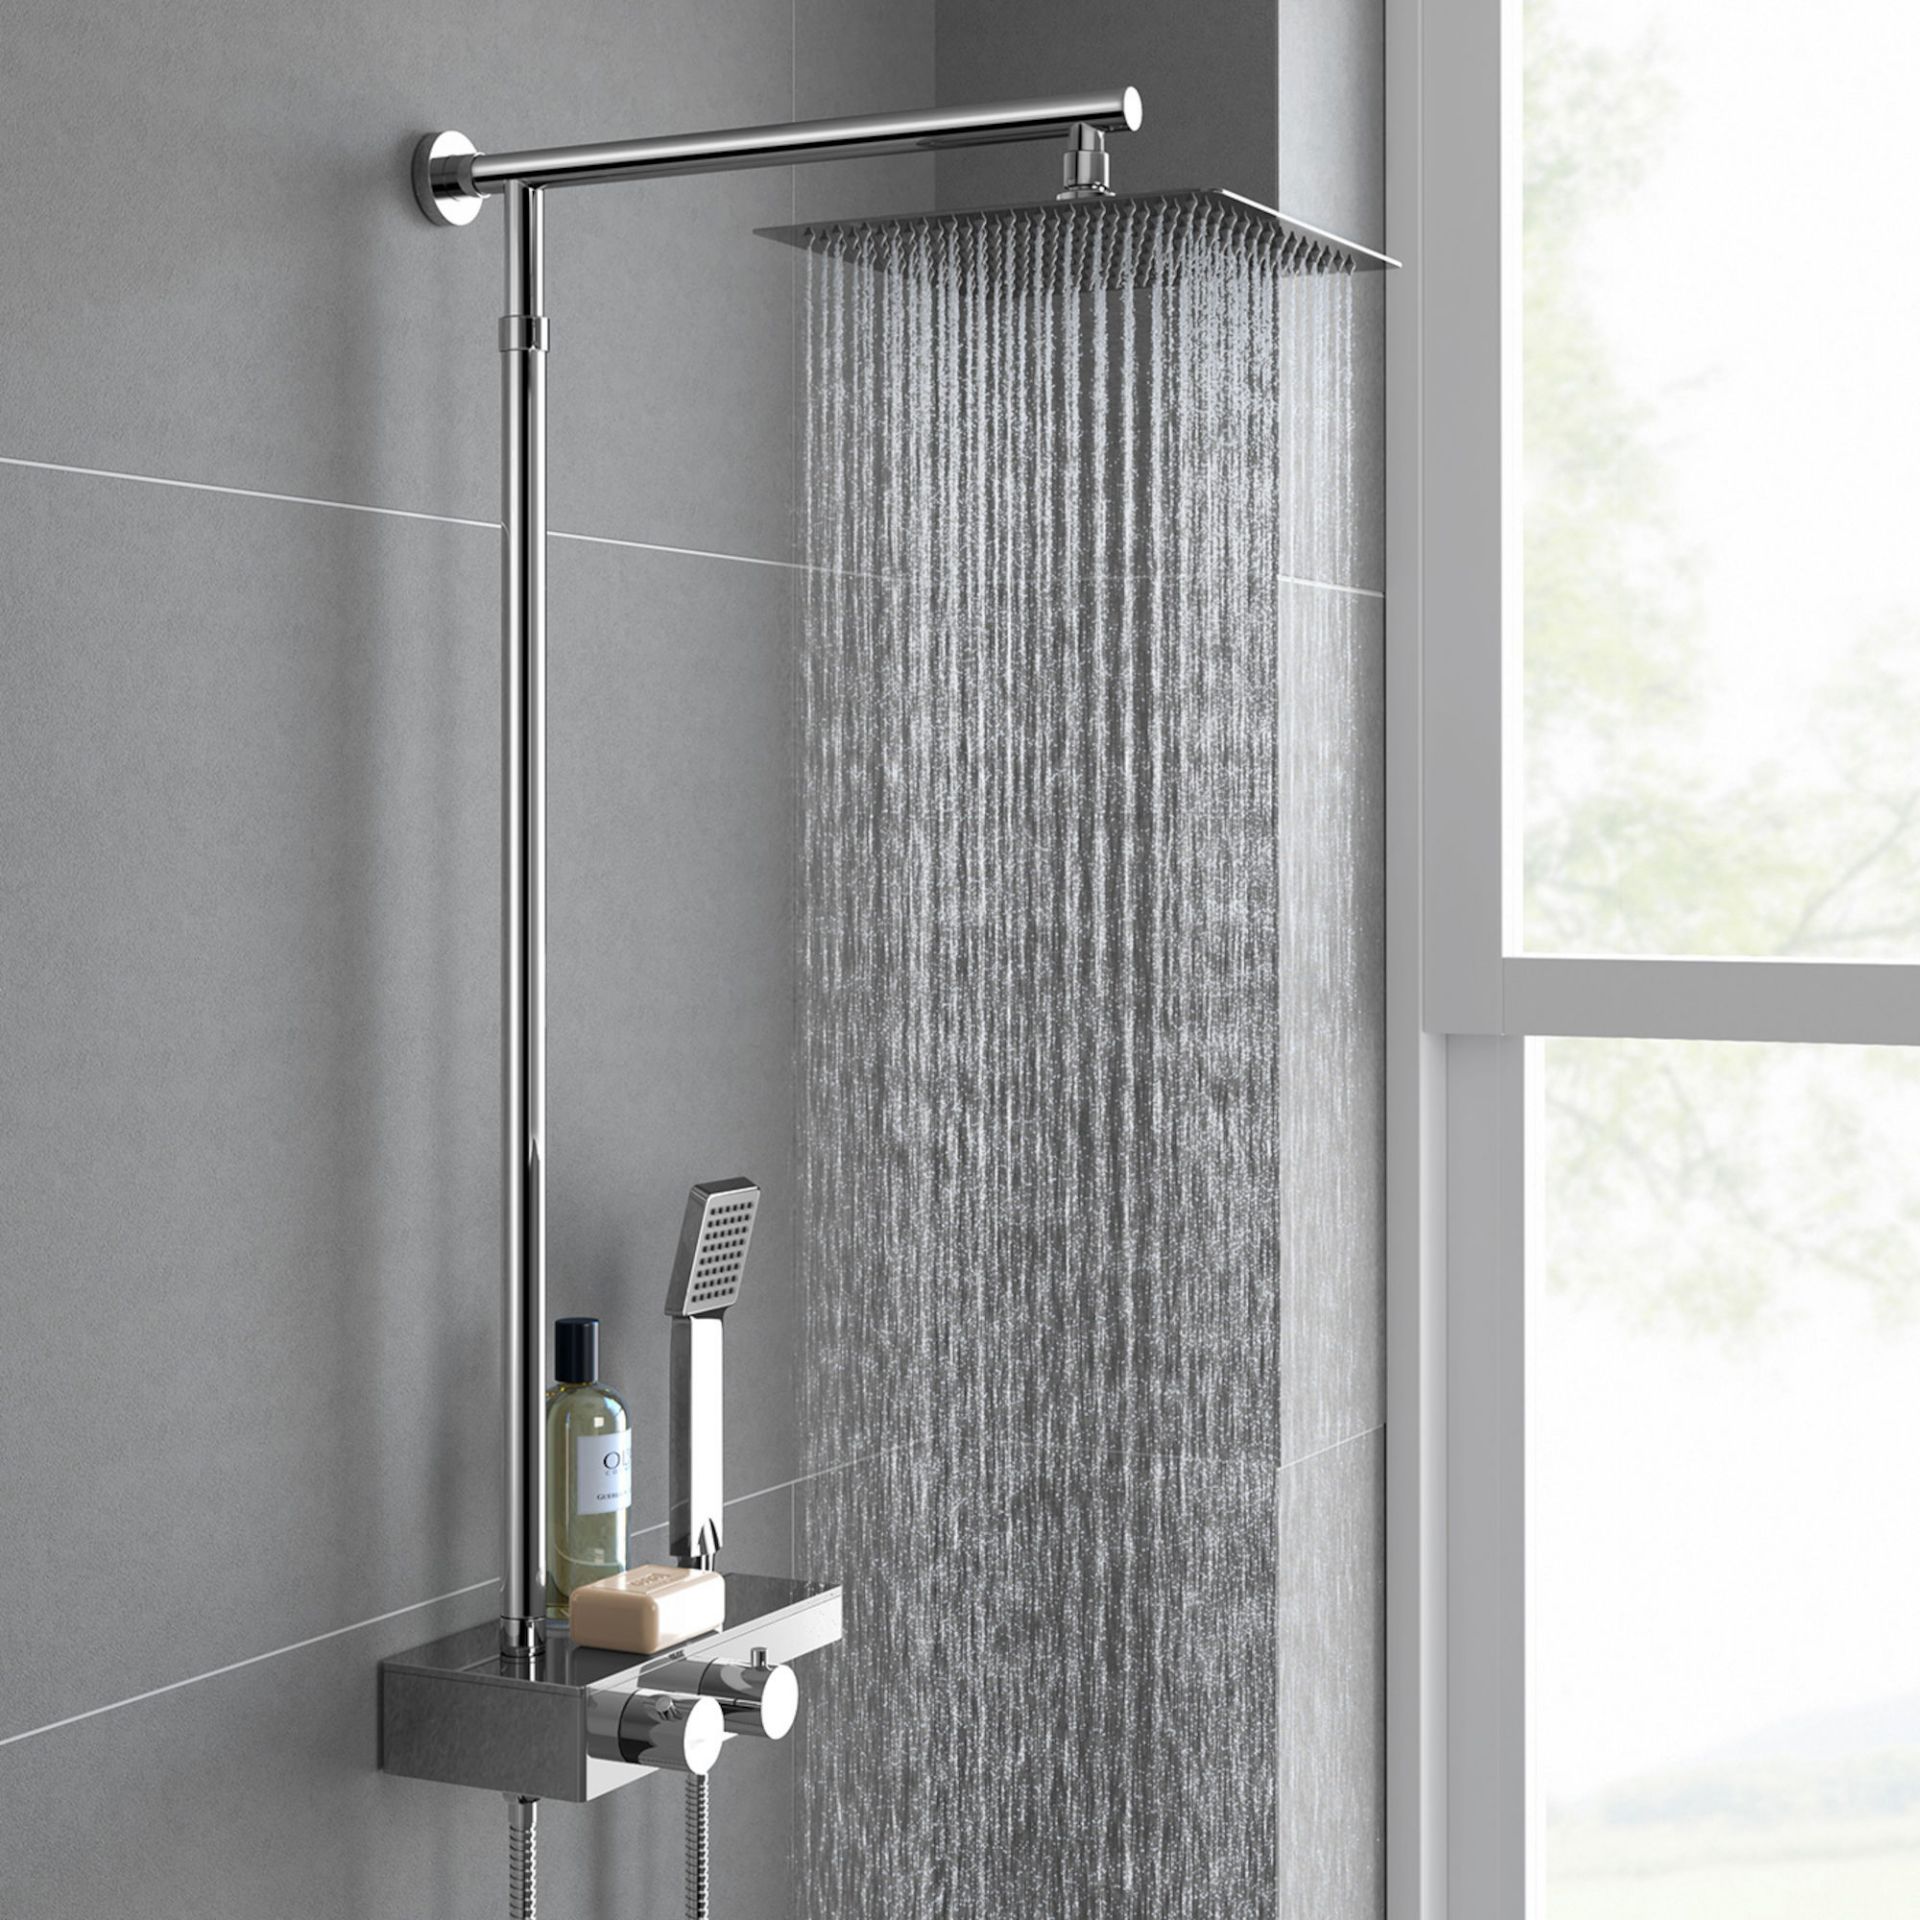 (CT228) Square Exposed Thermostatic Shower Shelf - Image 3 of 8